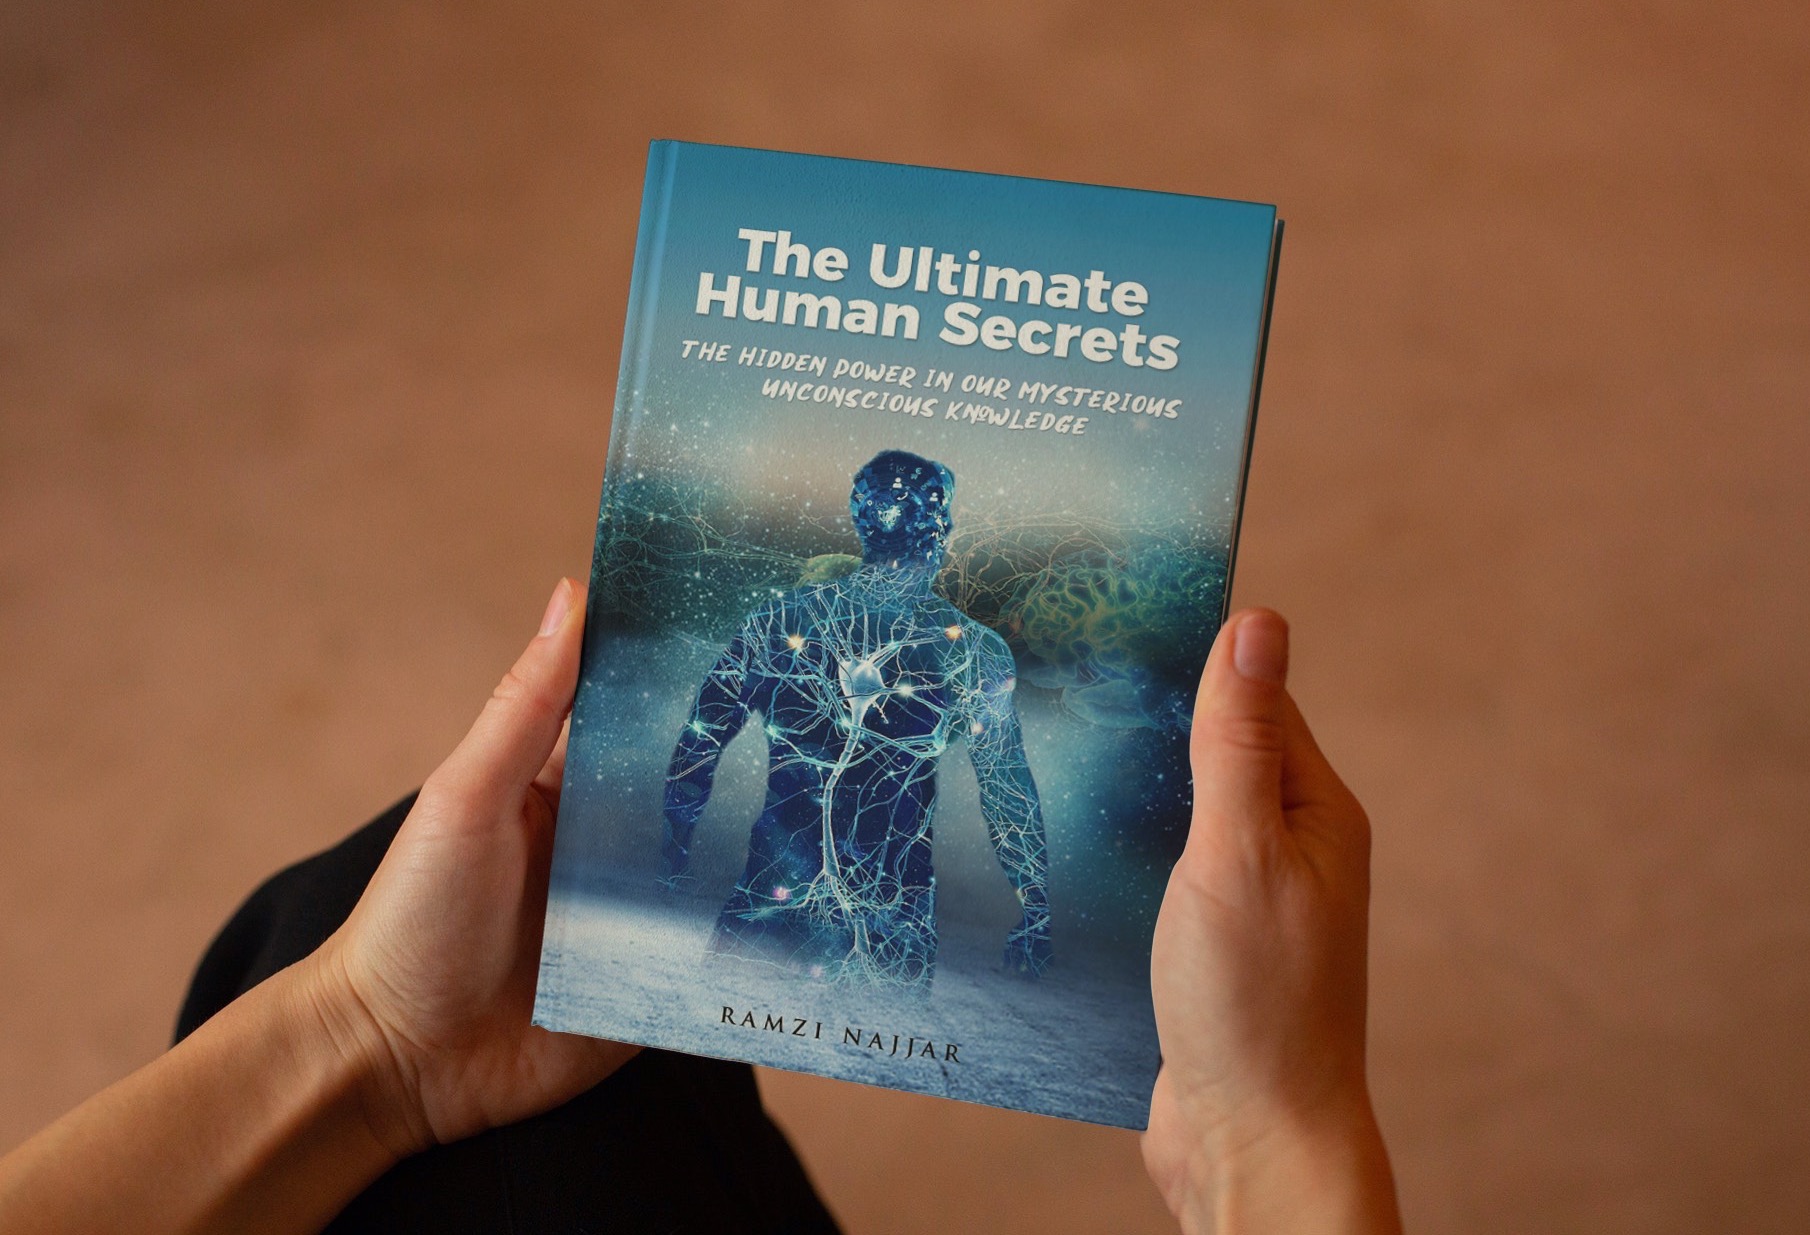 The Ultimate Human Secrets by Ramzi Najjar aims to help people unlock their true powers